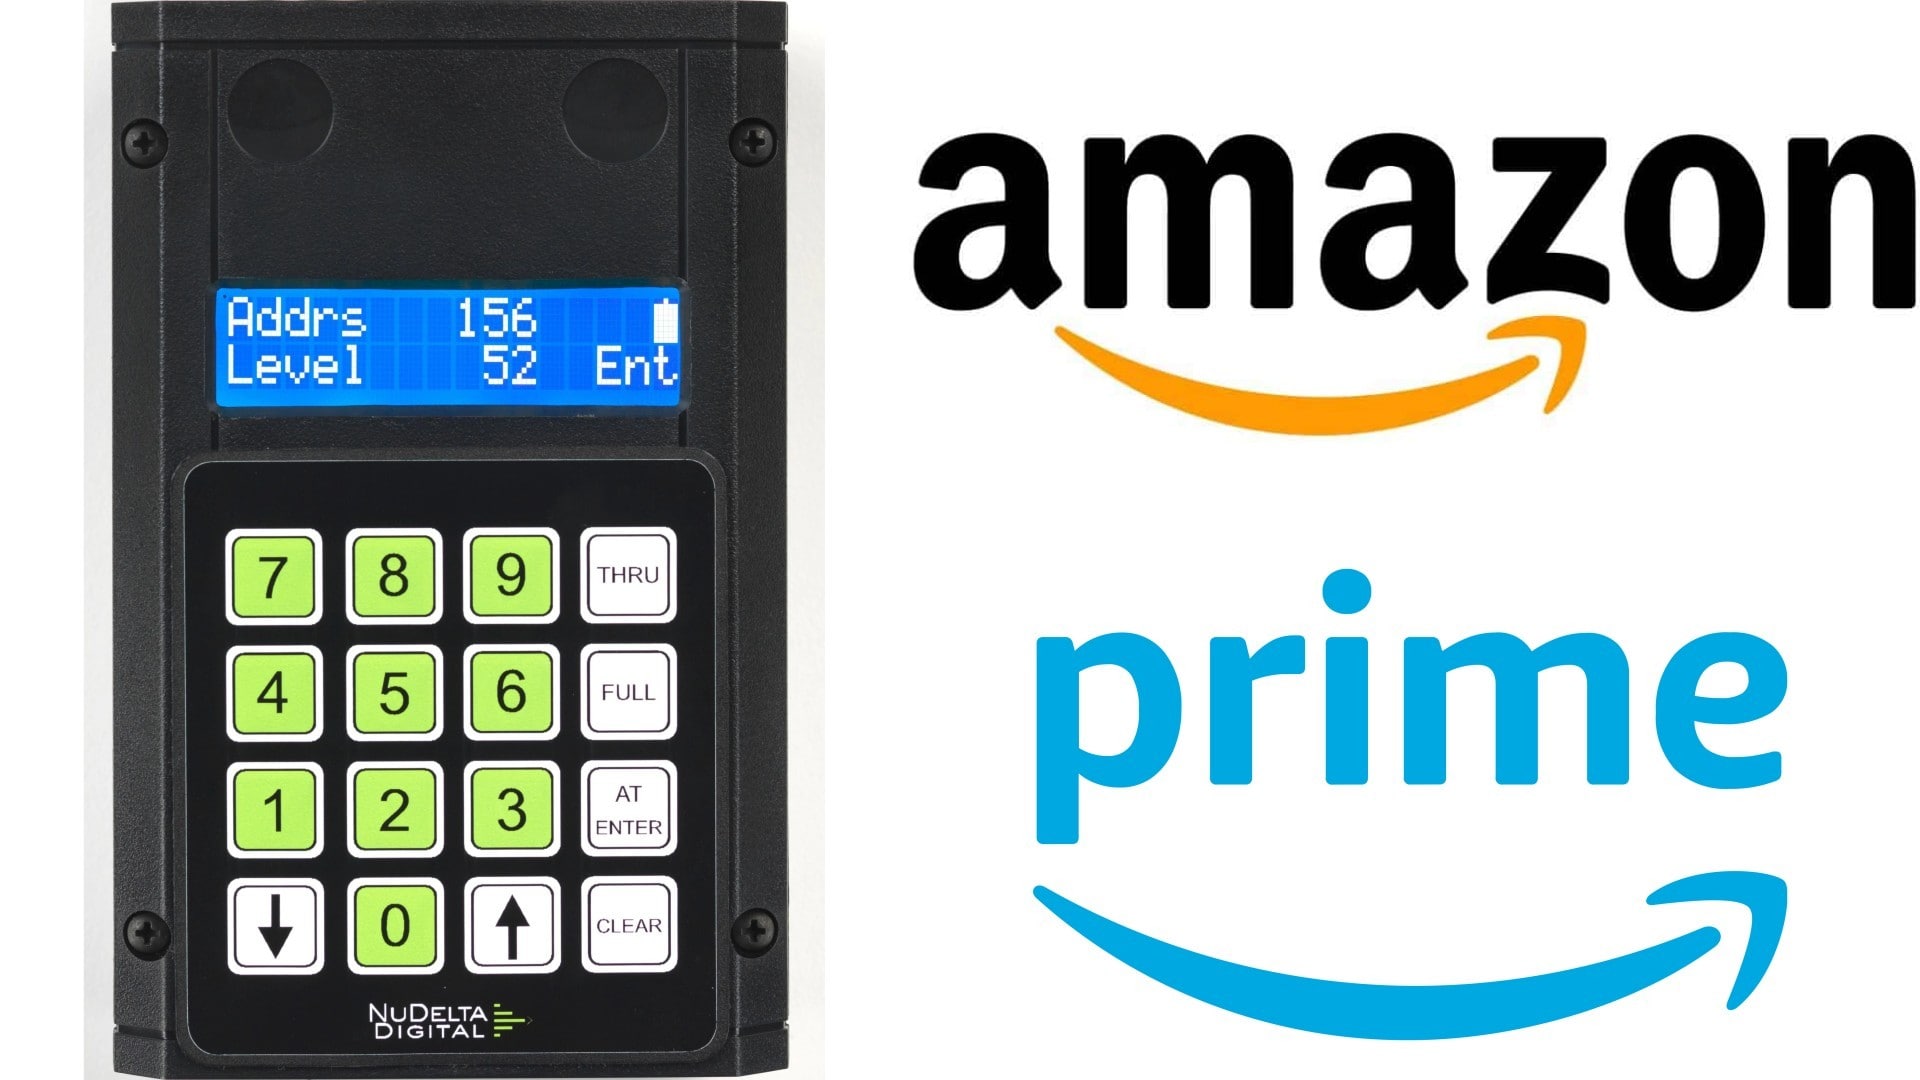 This is a link to the Amazon website to purchase the DXT1 DMX Tester for testing DMX lighting and testing DMX equipment